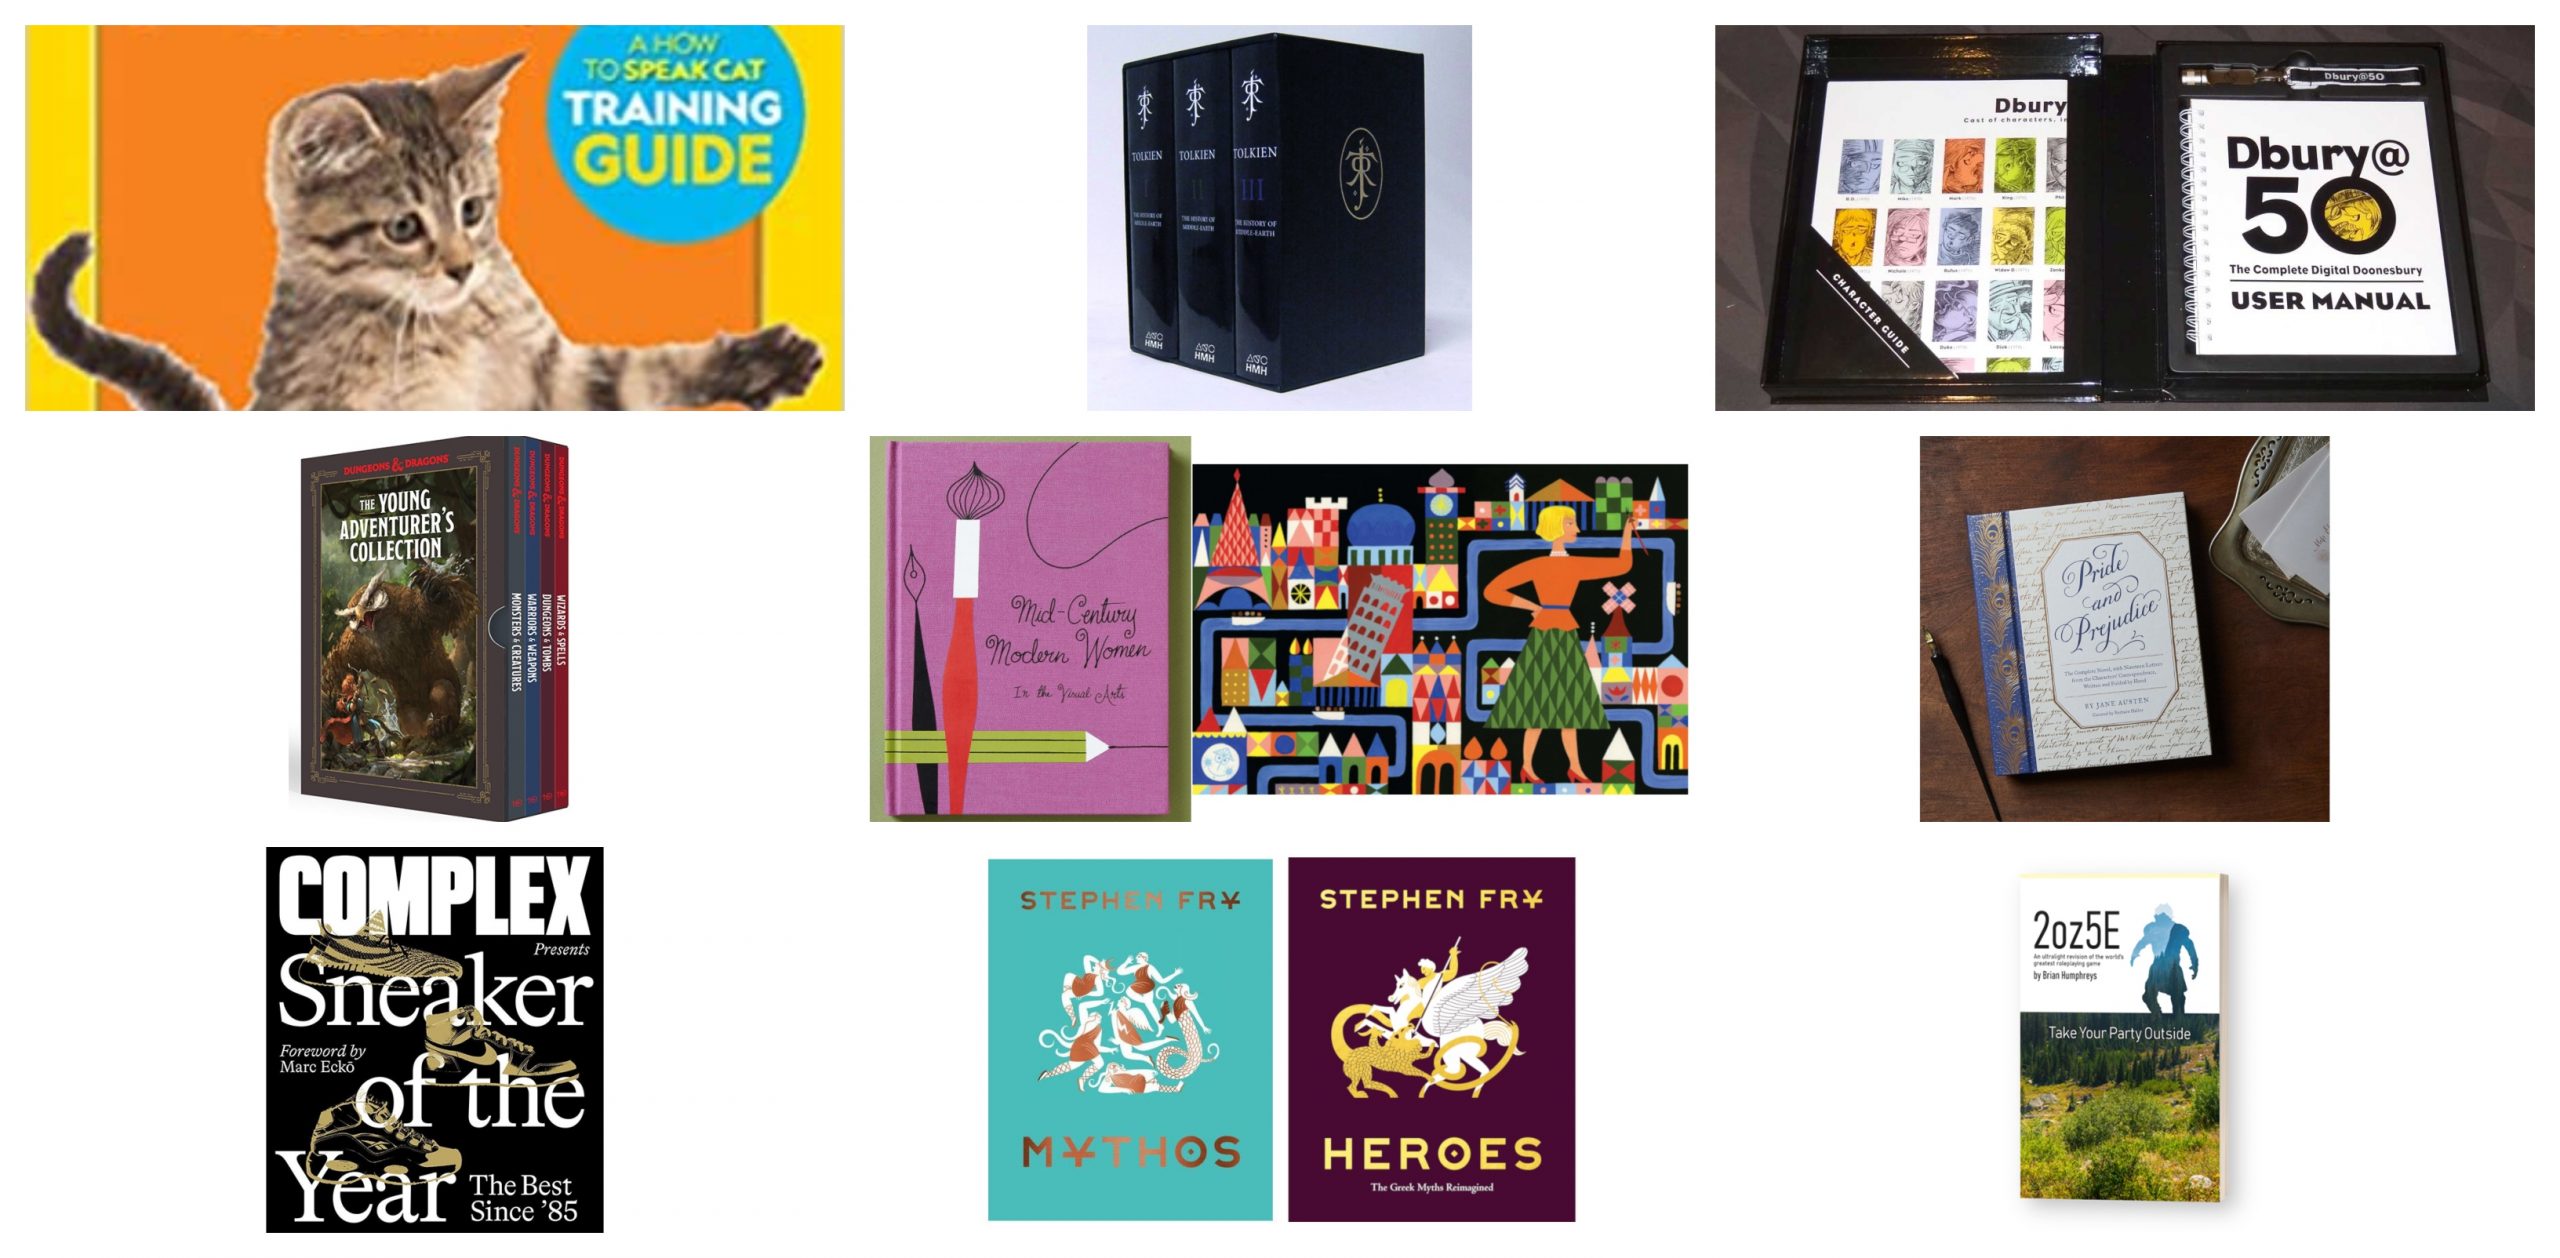 Holiday Gift Guide 2020: Music, Movies, Books